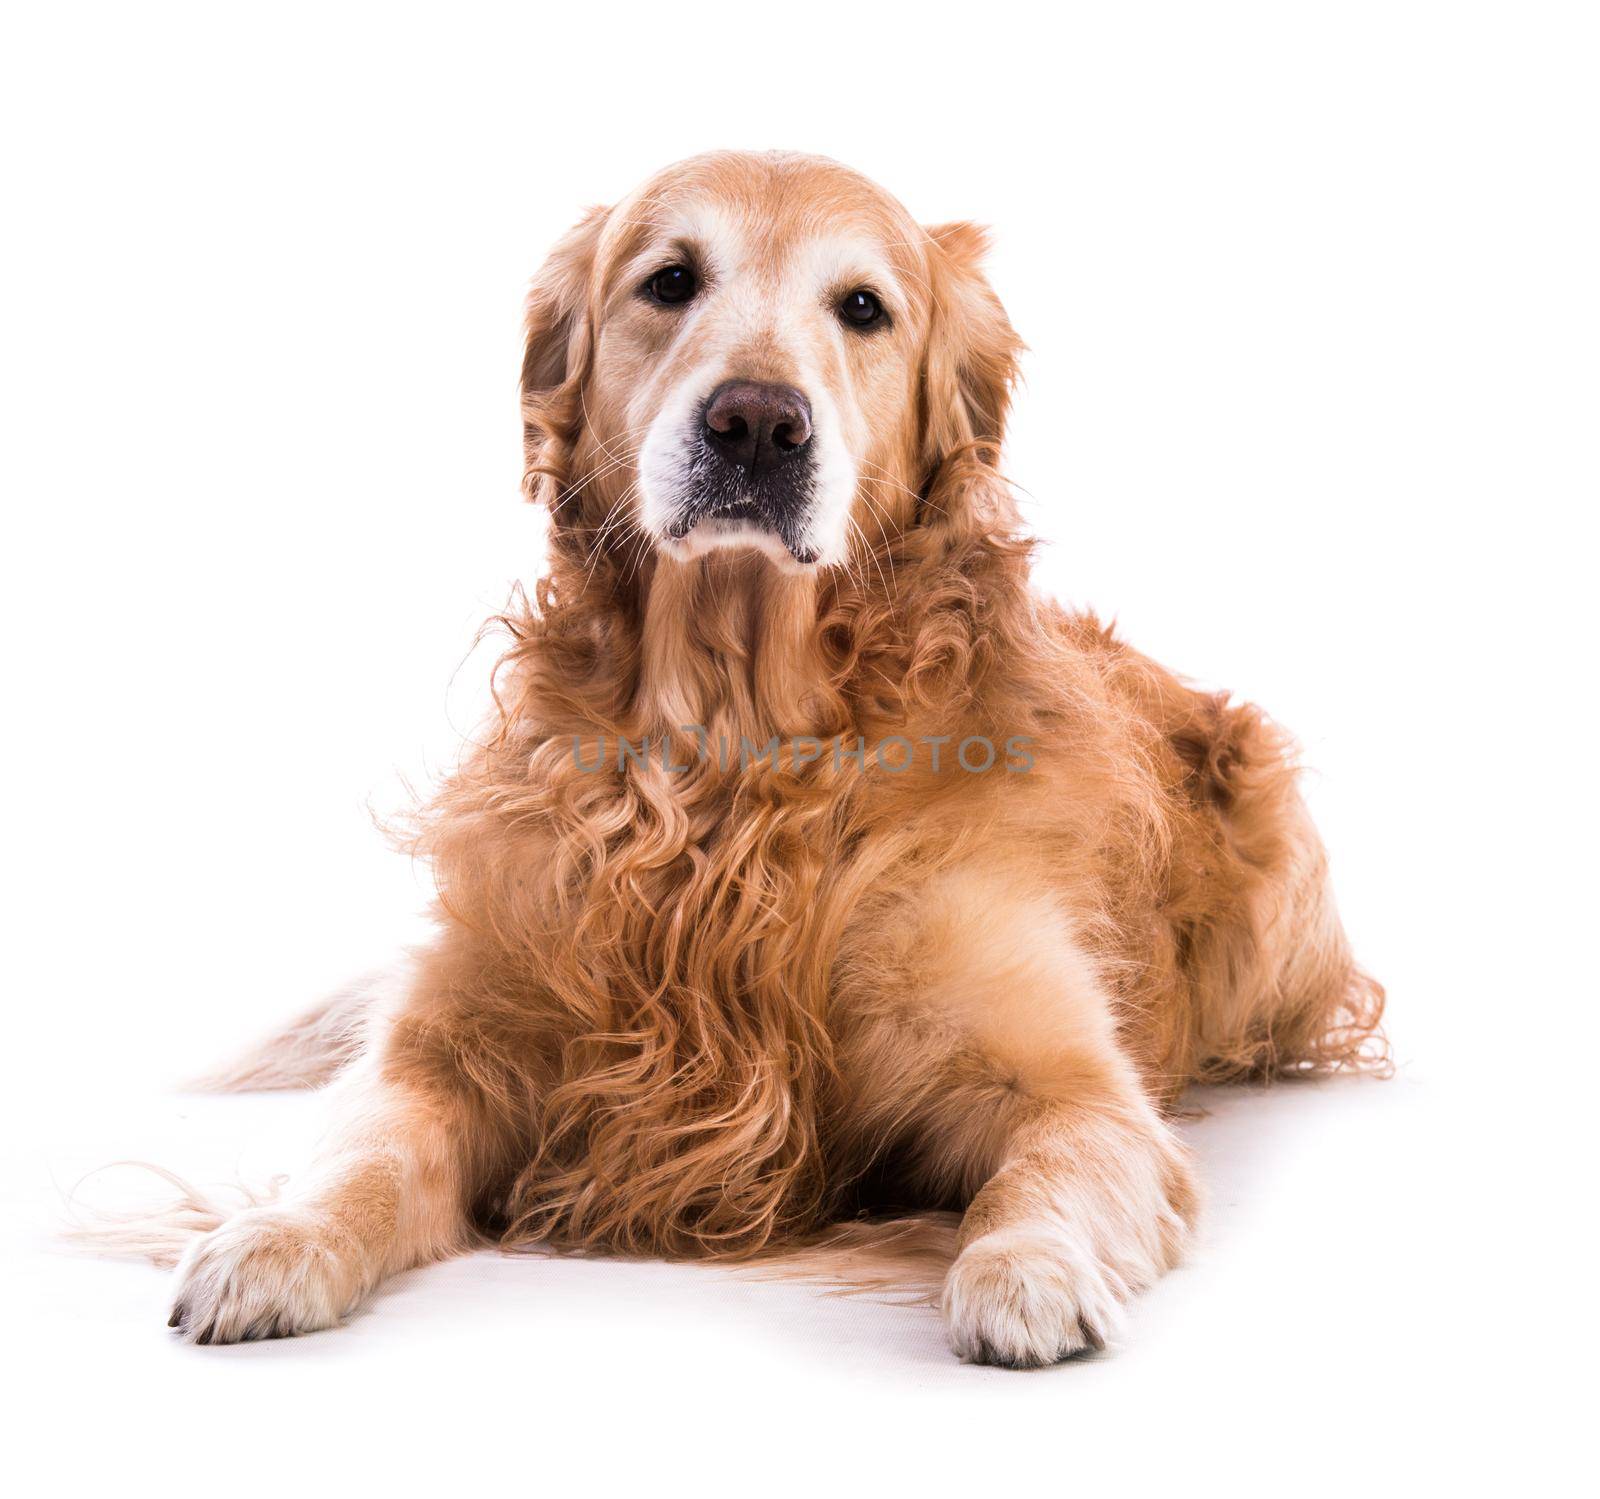 A golden retriever dog laying down over white